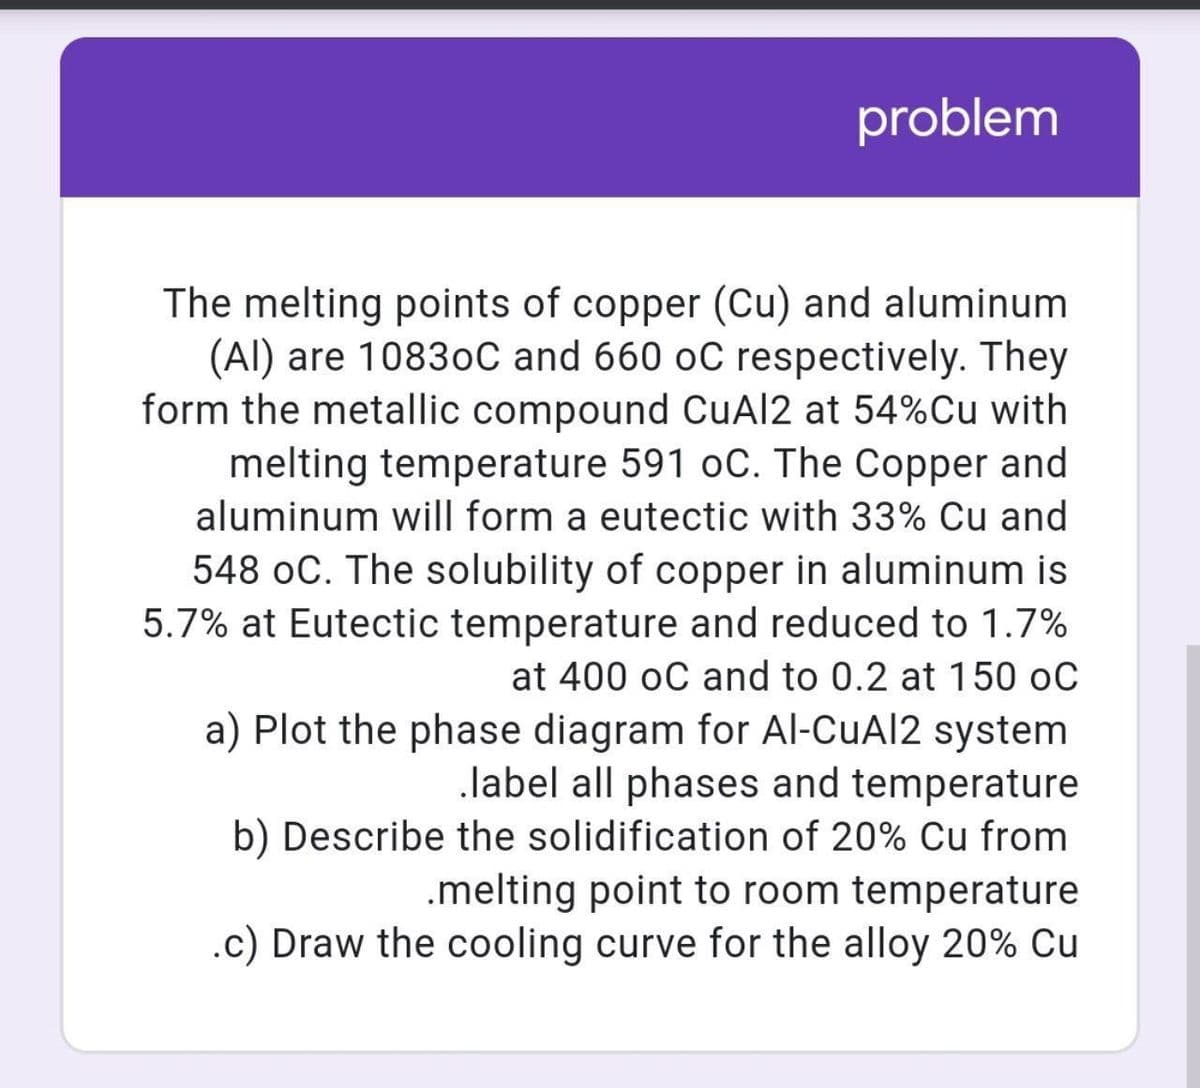 problem
The melting points of copper (Cu) and aluminum
(Al) are 10830C and 660 oC respectively. They
form the metallic compound CuAl2 at 54%Cu with
melting temperature 591 oC. The Copper and
aluminum will form a eutectic with 33% Cu and
548 oC. The solubility of copper in aluminum is
5.7% at Eutectic temperature and reduced to 1.7%
at 400 oC and to 0.2 at 150 oC
a) Plot the phase diagram for Al-CuAl2 system
label all phases and temperature
b) Describe the solidification of 20% Cu from
.melting point to room temperature
.c) Draw the cooling curve for the alloy 20% Cu
